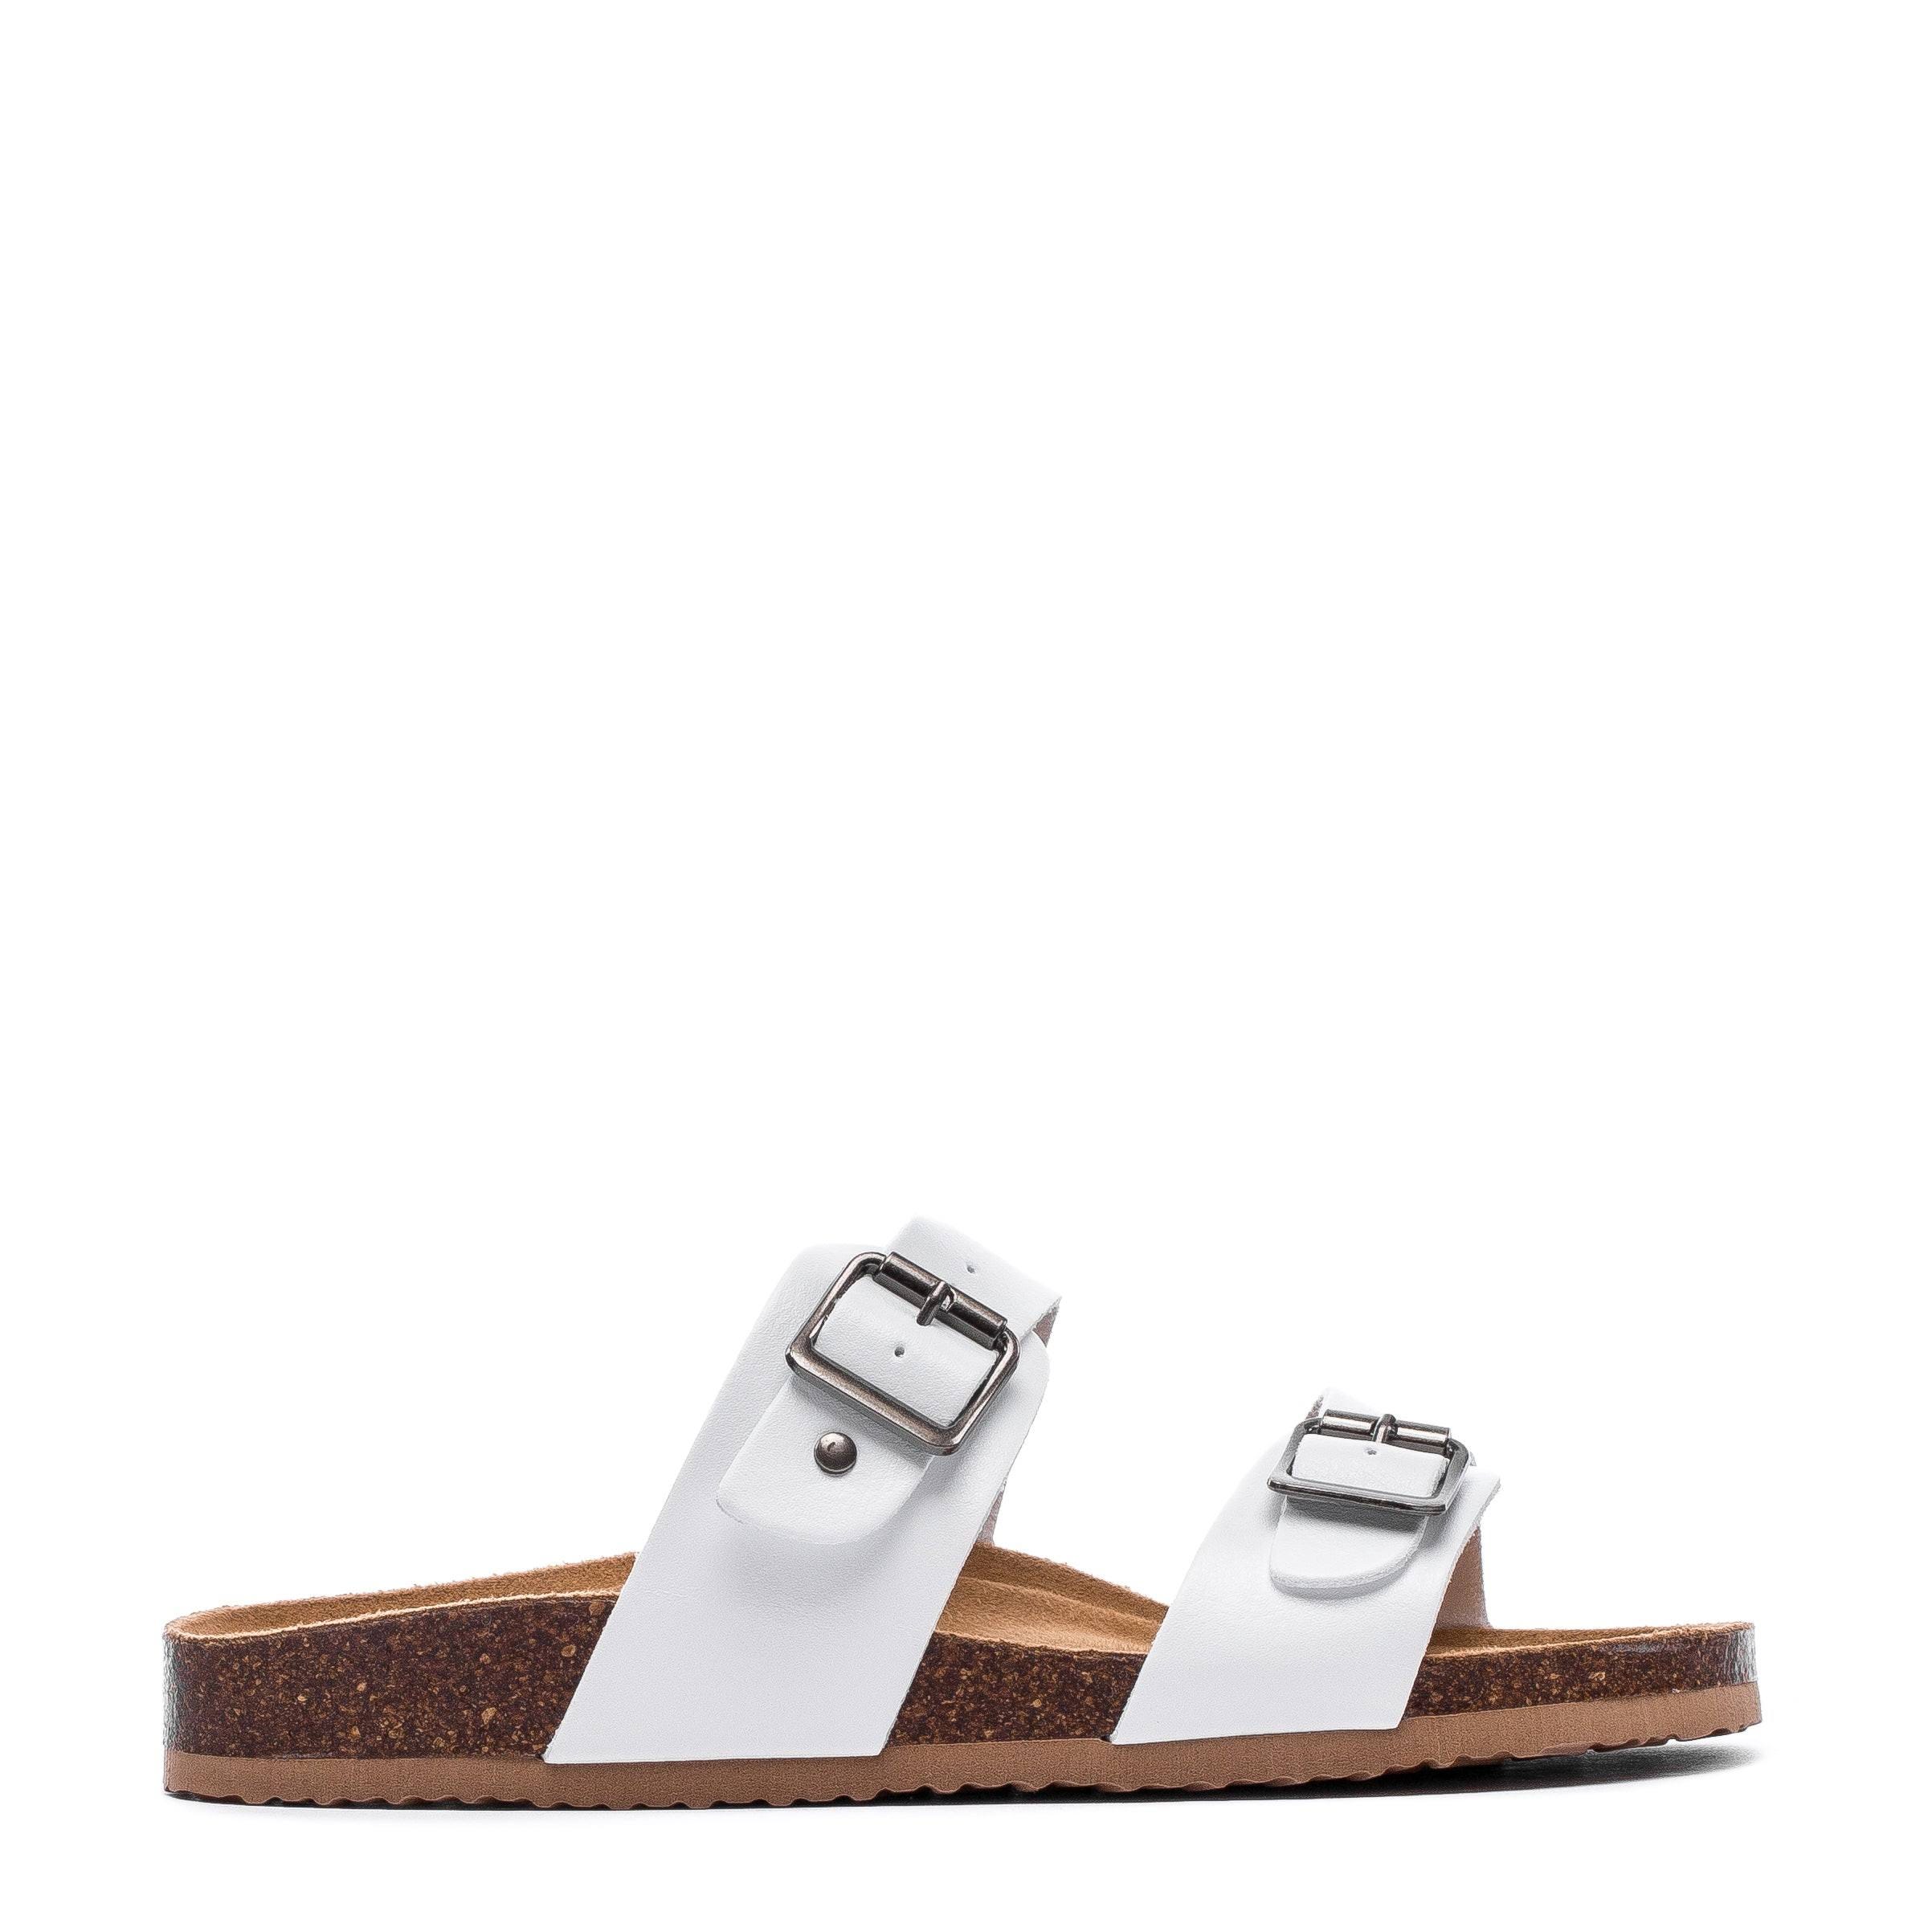 CELIA BOUNTY WIDE WOMEN'S SANDALS - COMFORTABLE STYLE FOR ALL DAY WEAR | Image